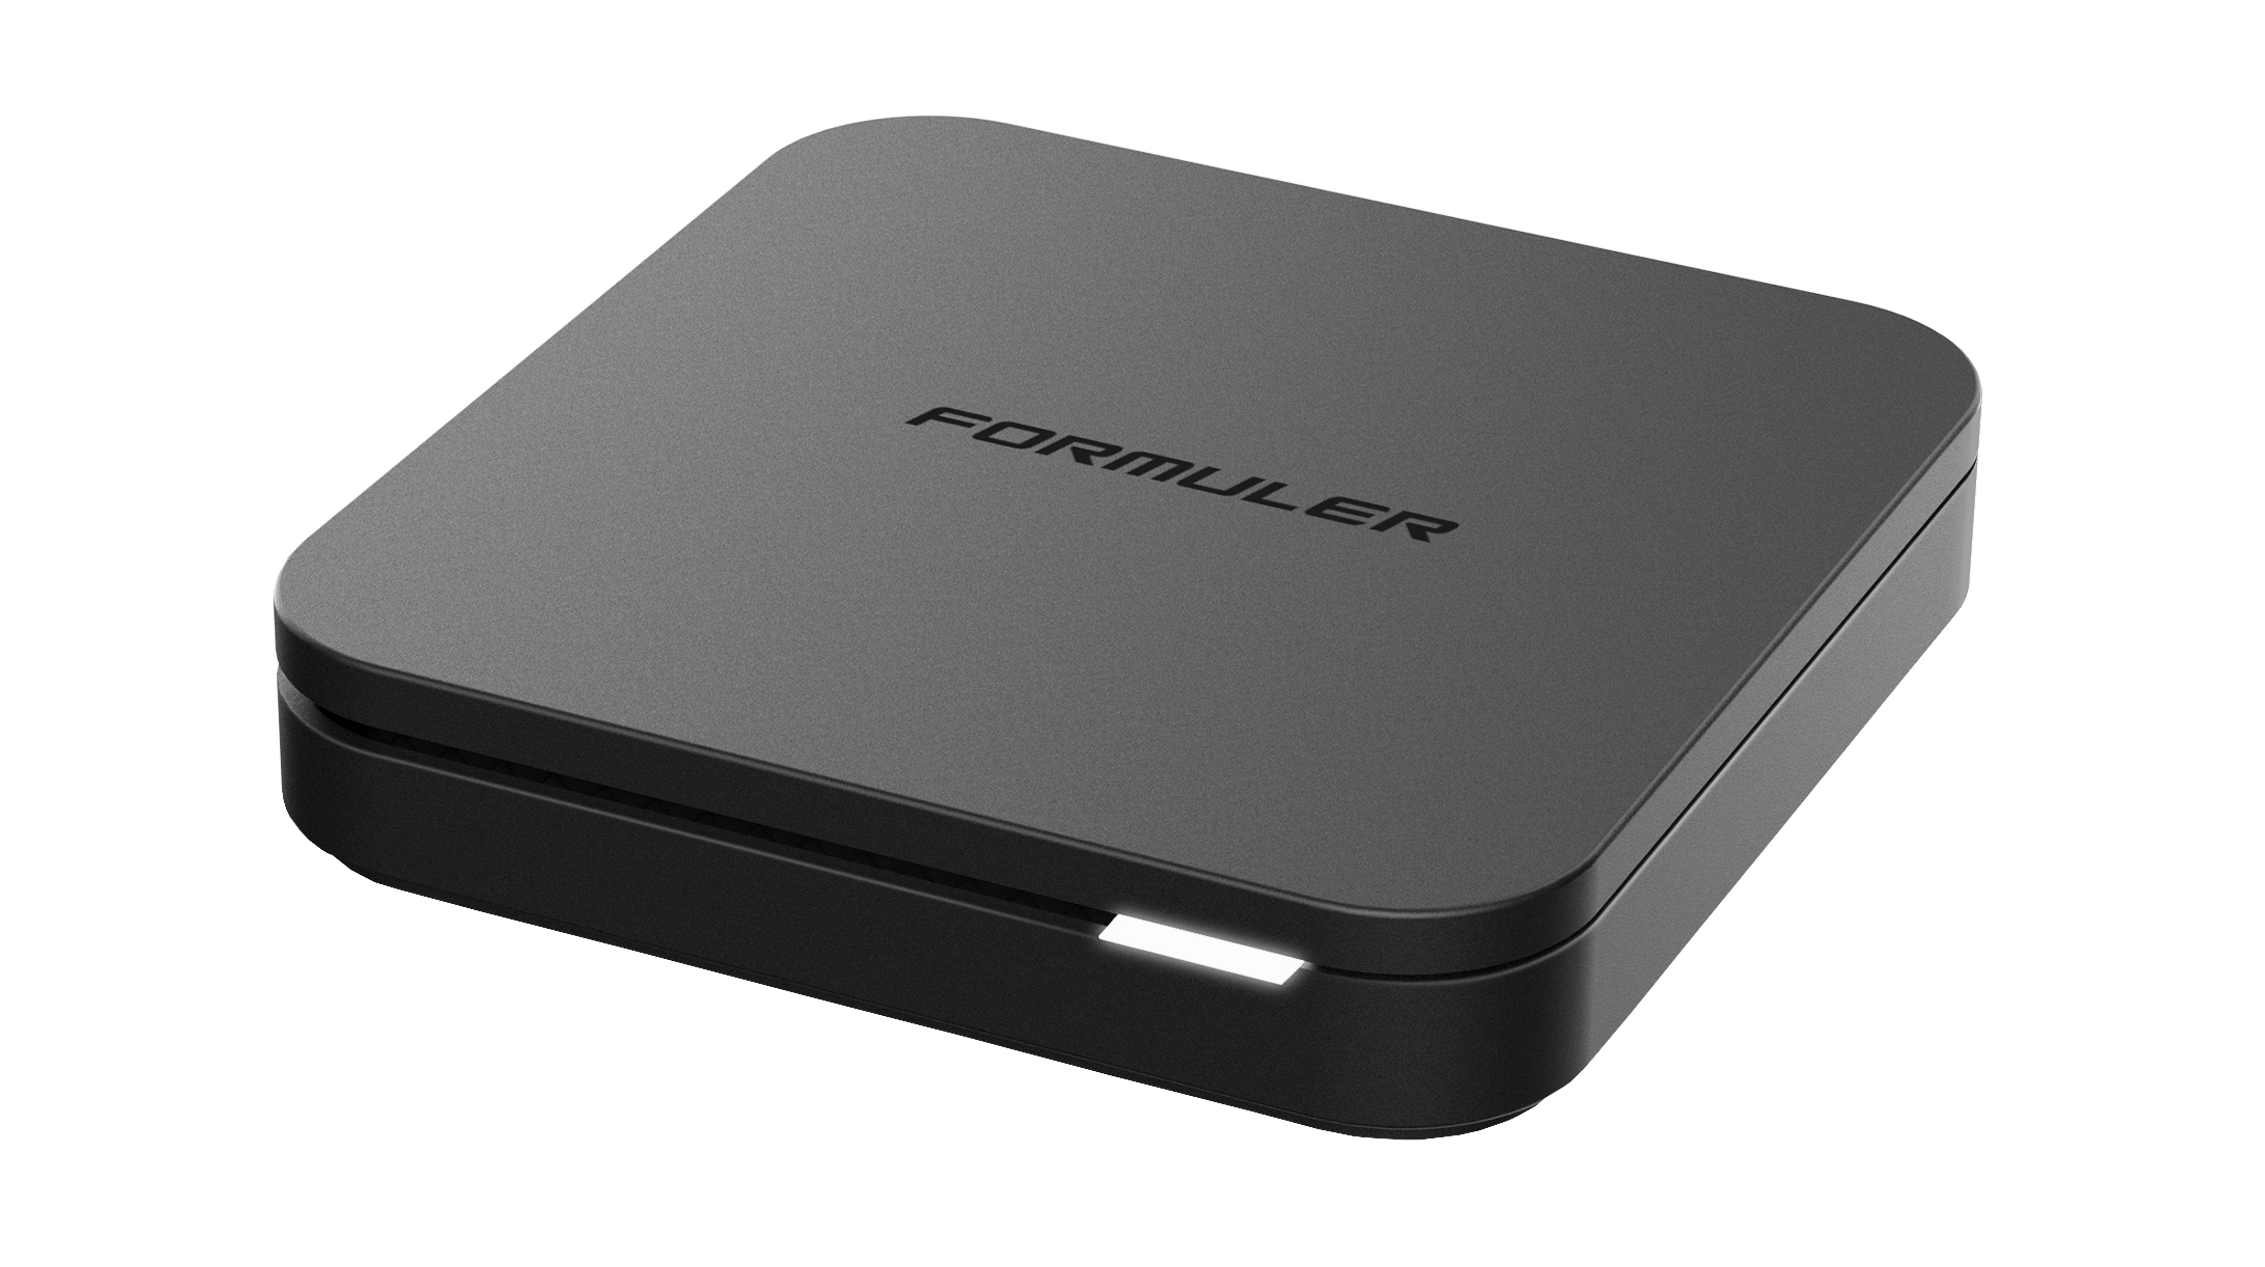 Formuler Z10  SE - The most affordable Android box